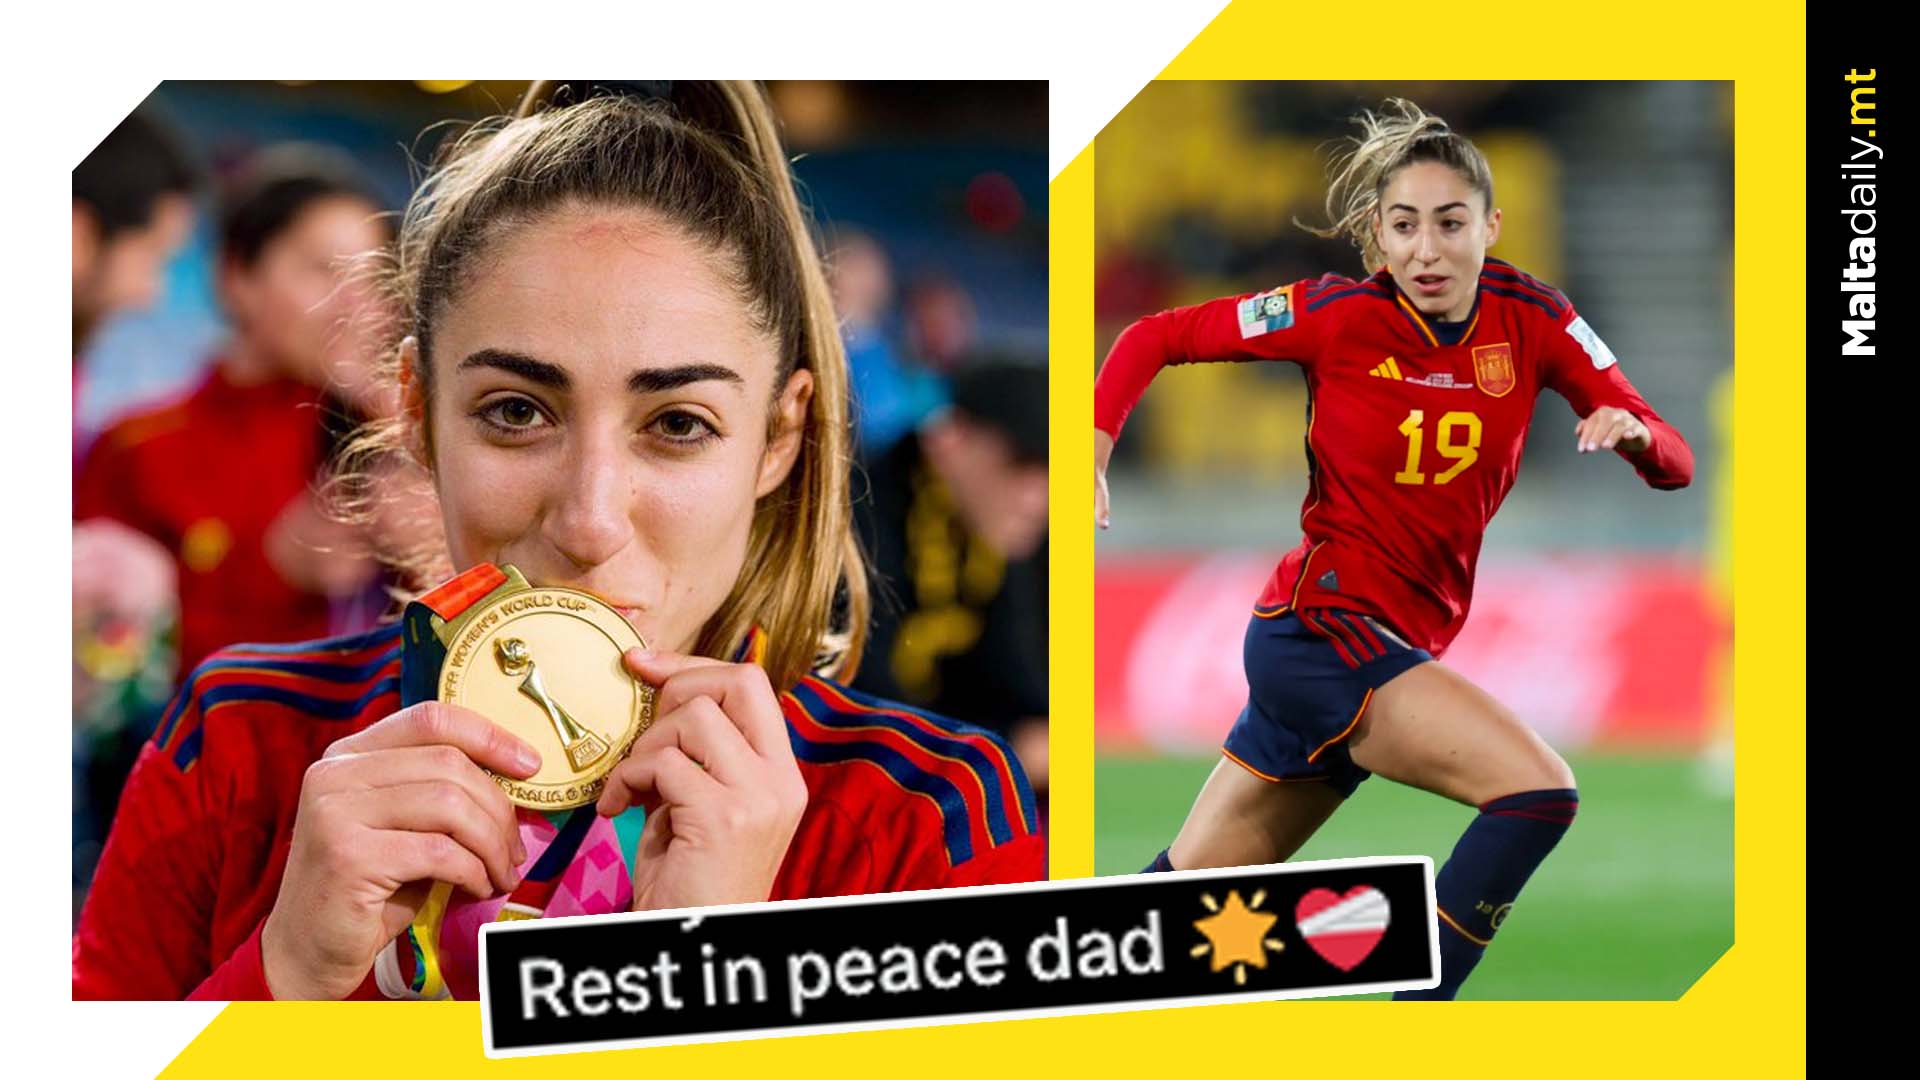 Spain Captain Told Of Dad's Death After World Cup Victory